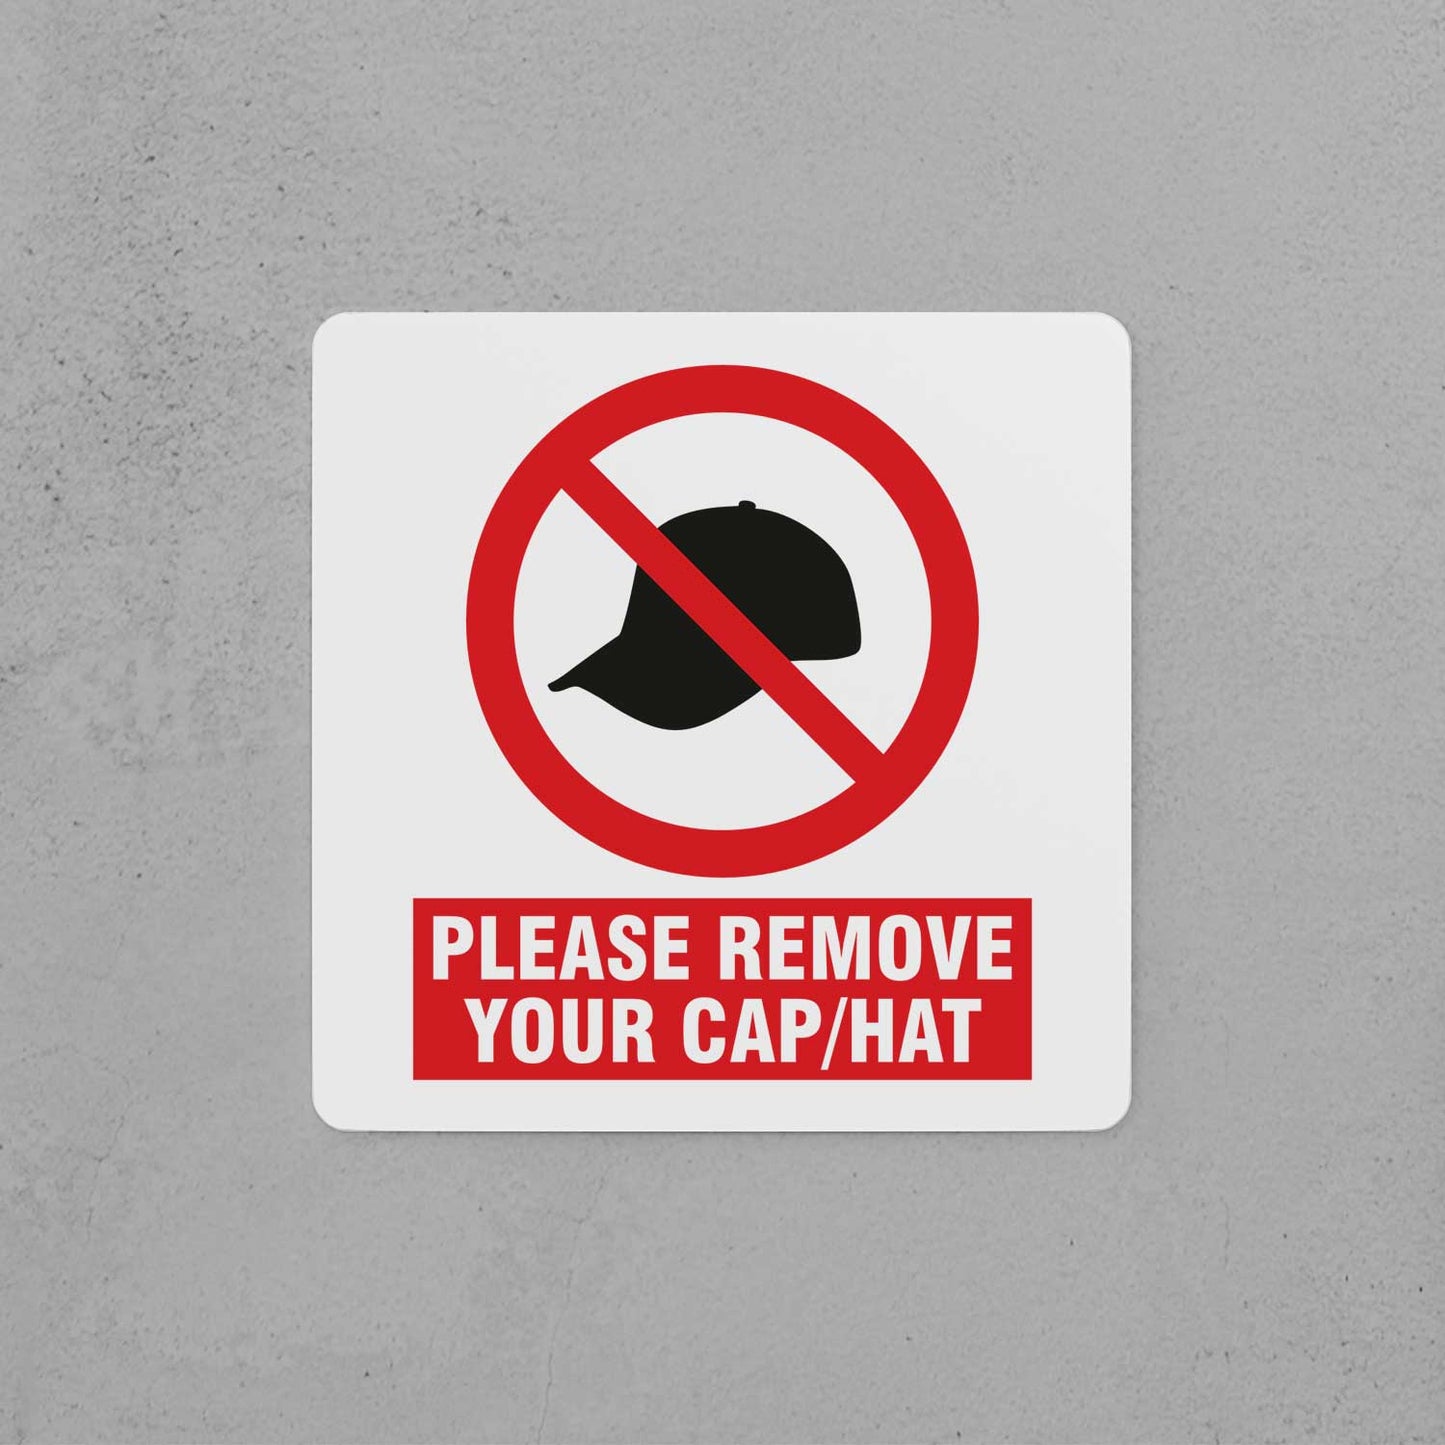 Remove Your Cap Sign